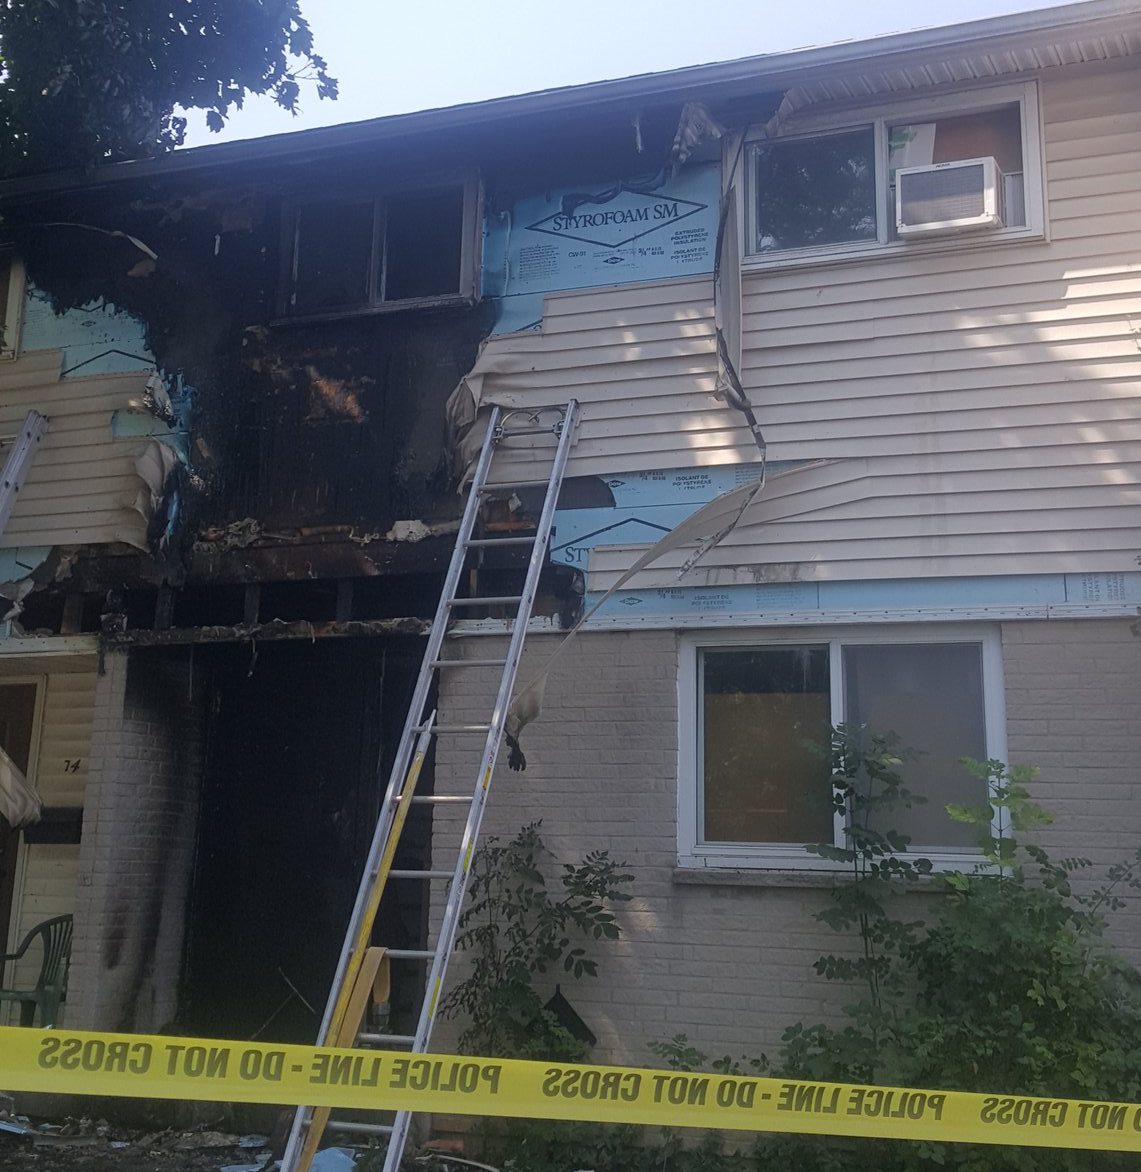 Ontario's fire marshall's office is investigating after two fires broke out in the same townhouse complex Tuesday morning.